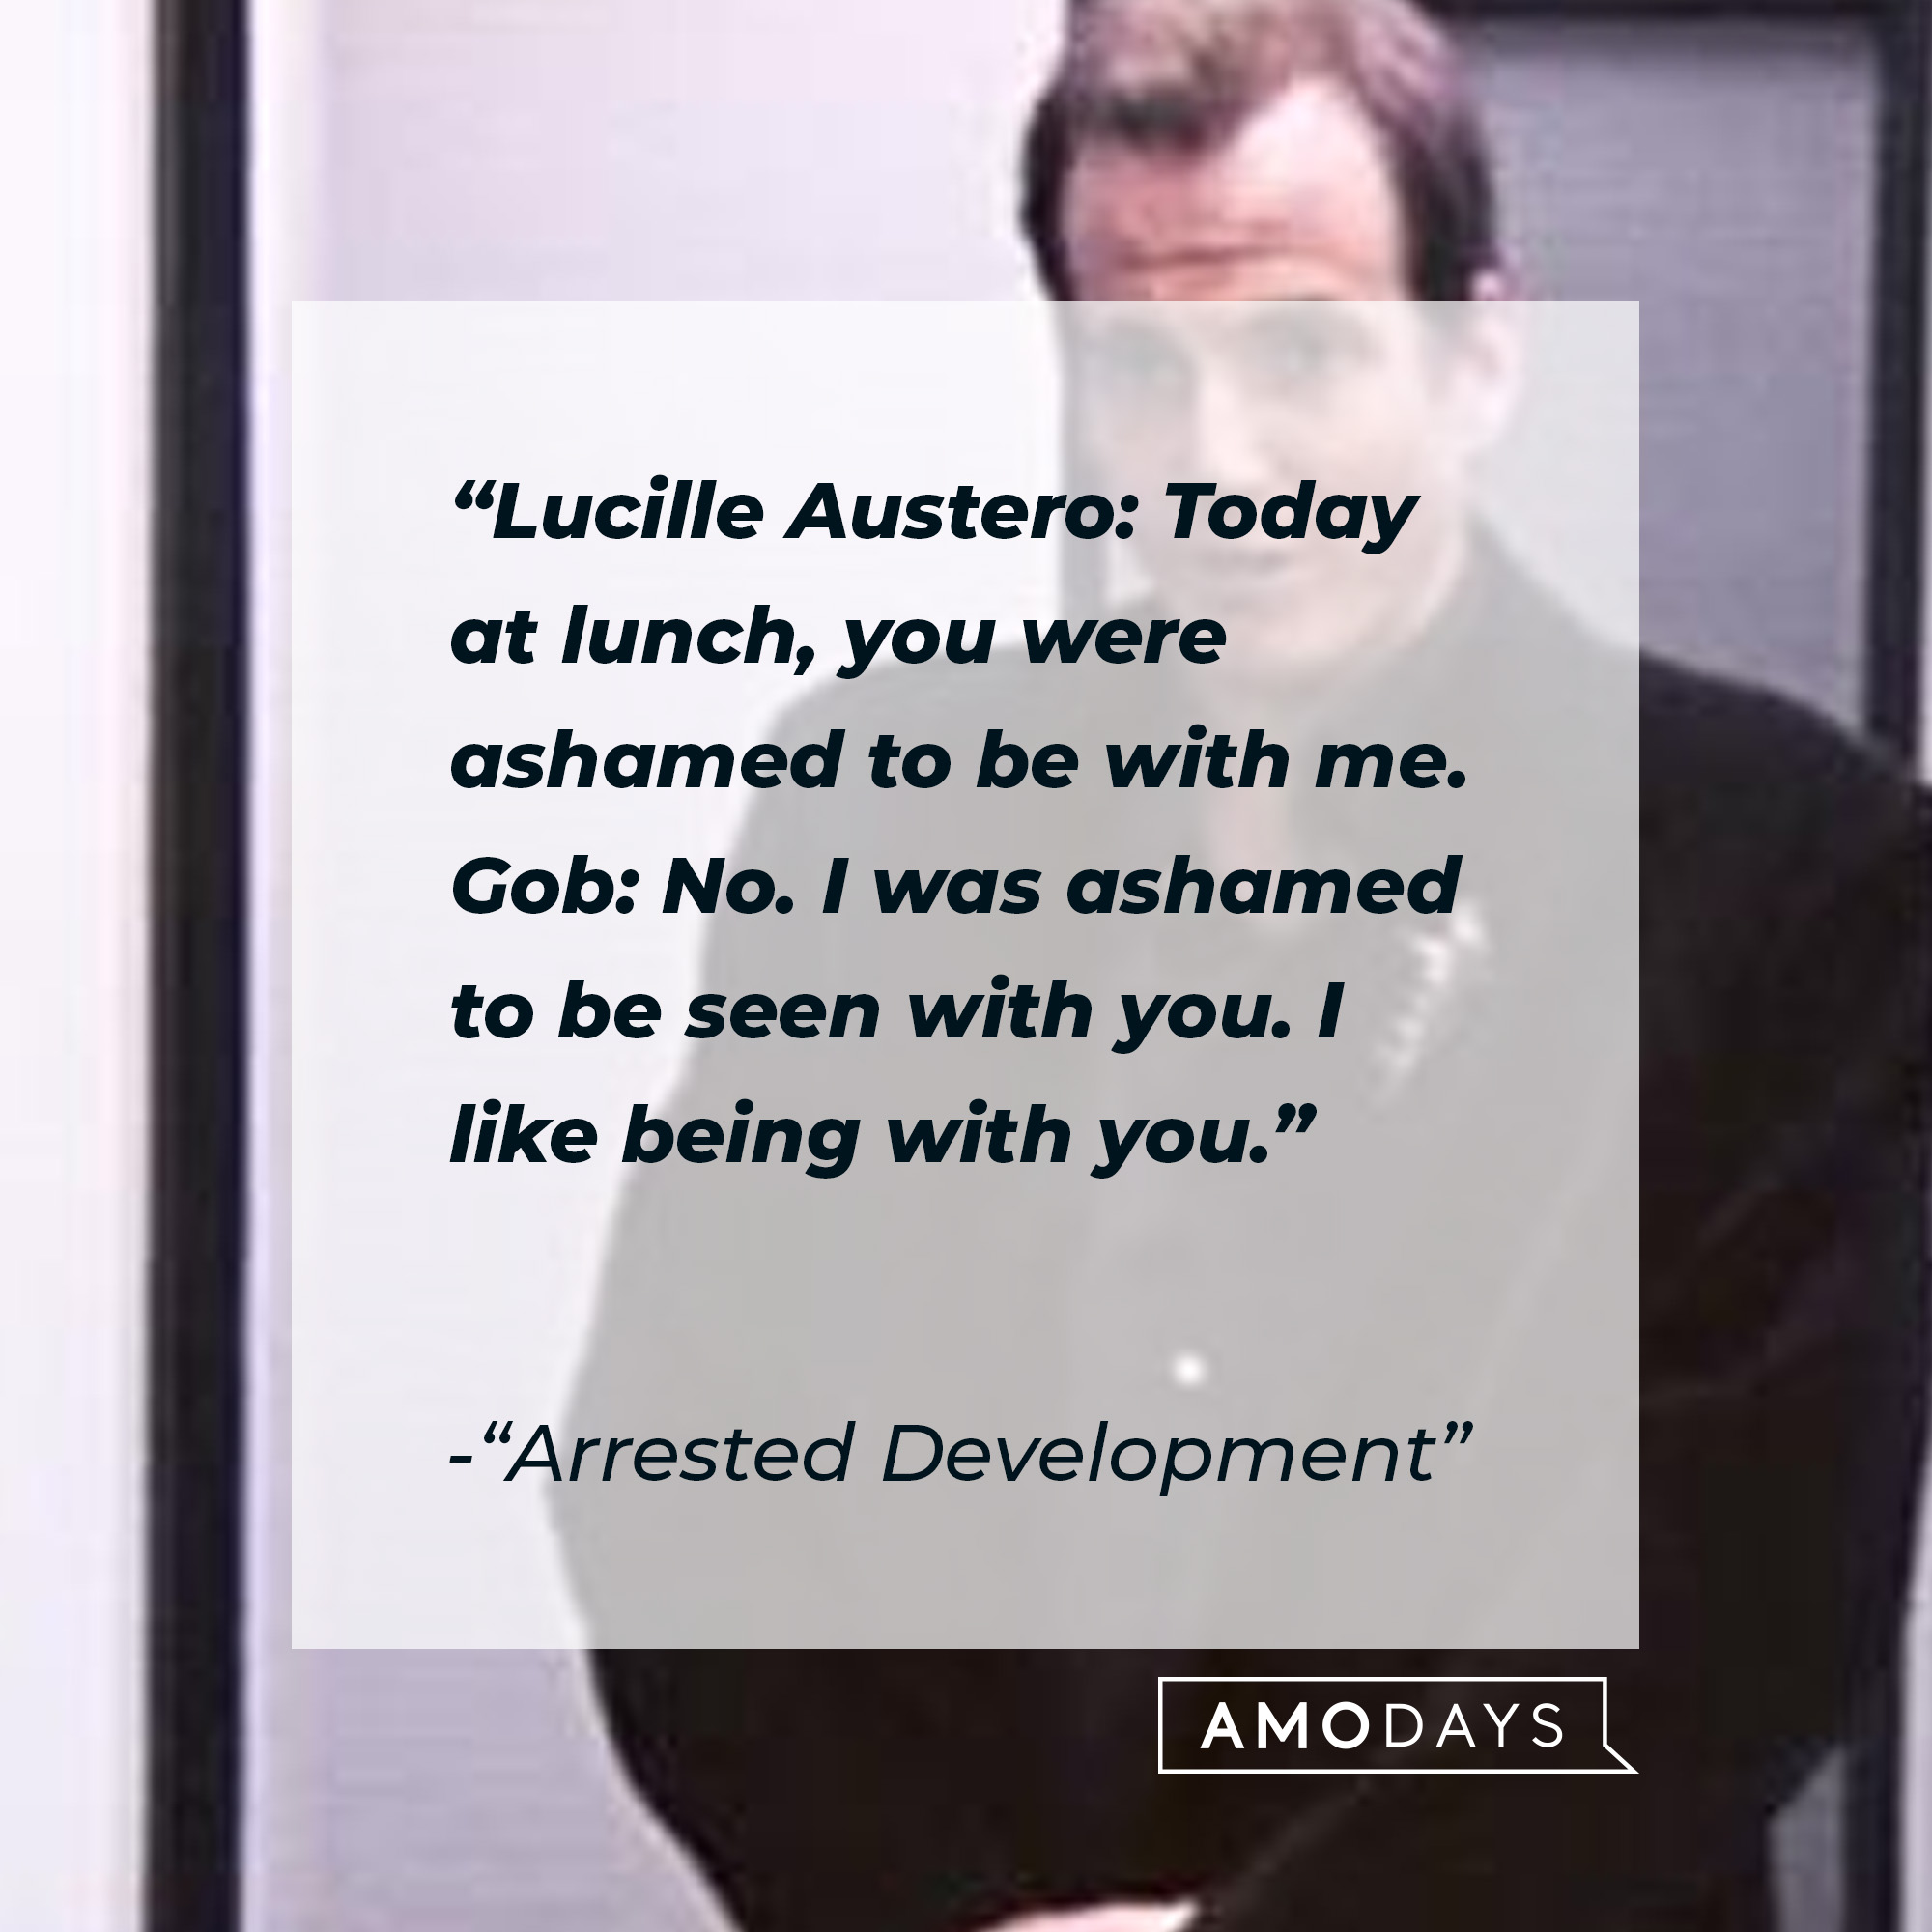 Quote from "Arrested Development:" "Lucille Austero: Today at lunch, you were ashamed to be with me. Gob: No. I was ashamed to be seen with you. I like being with you." | Source: facebook.com/ArrestedDevelopment